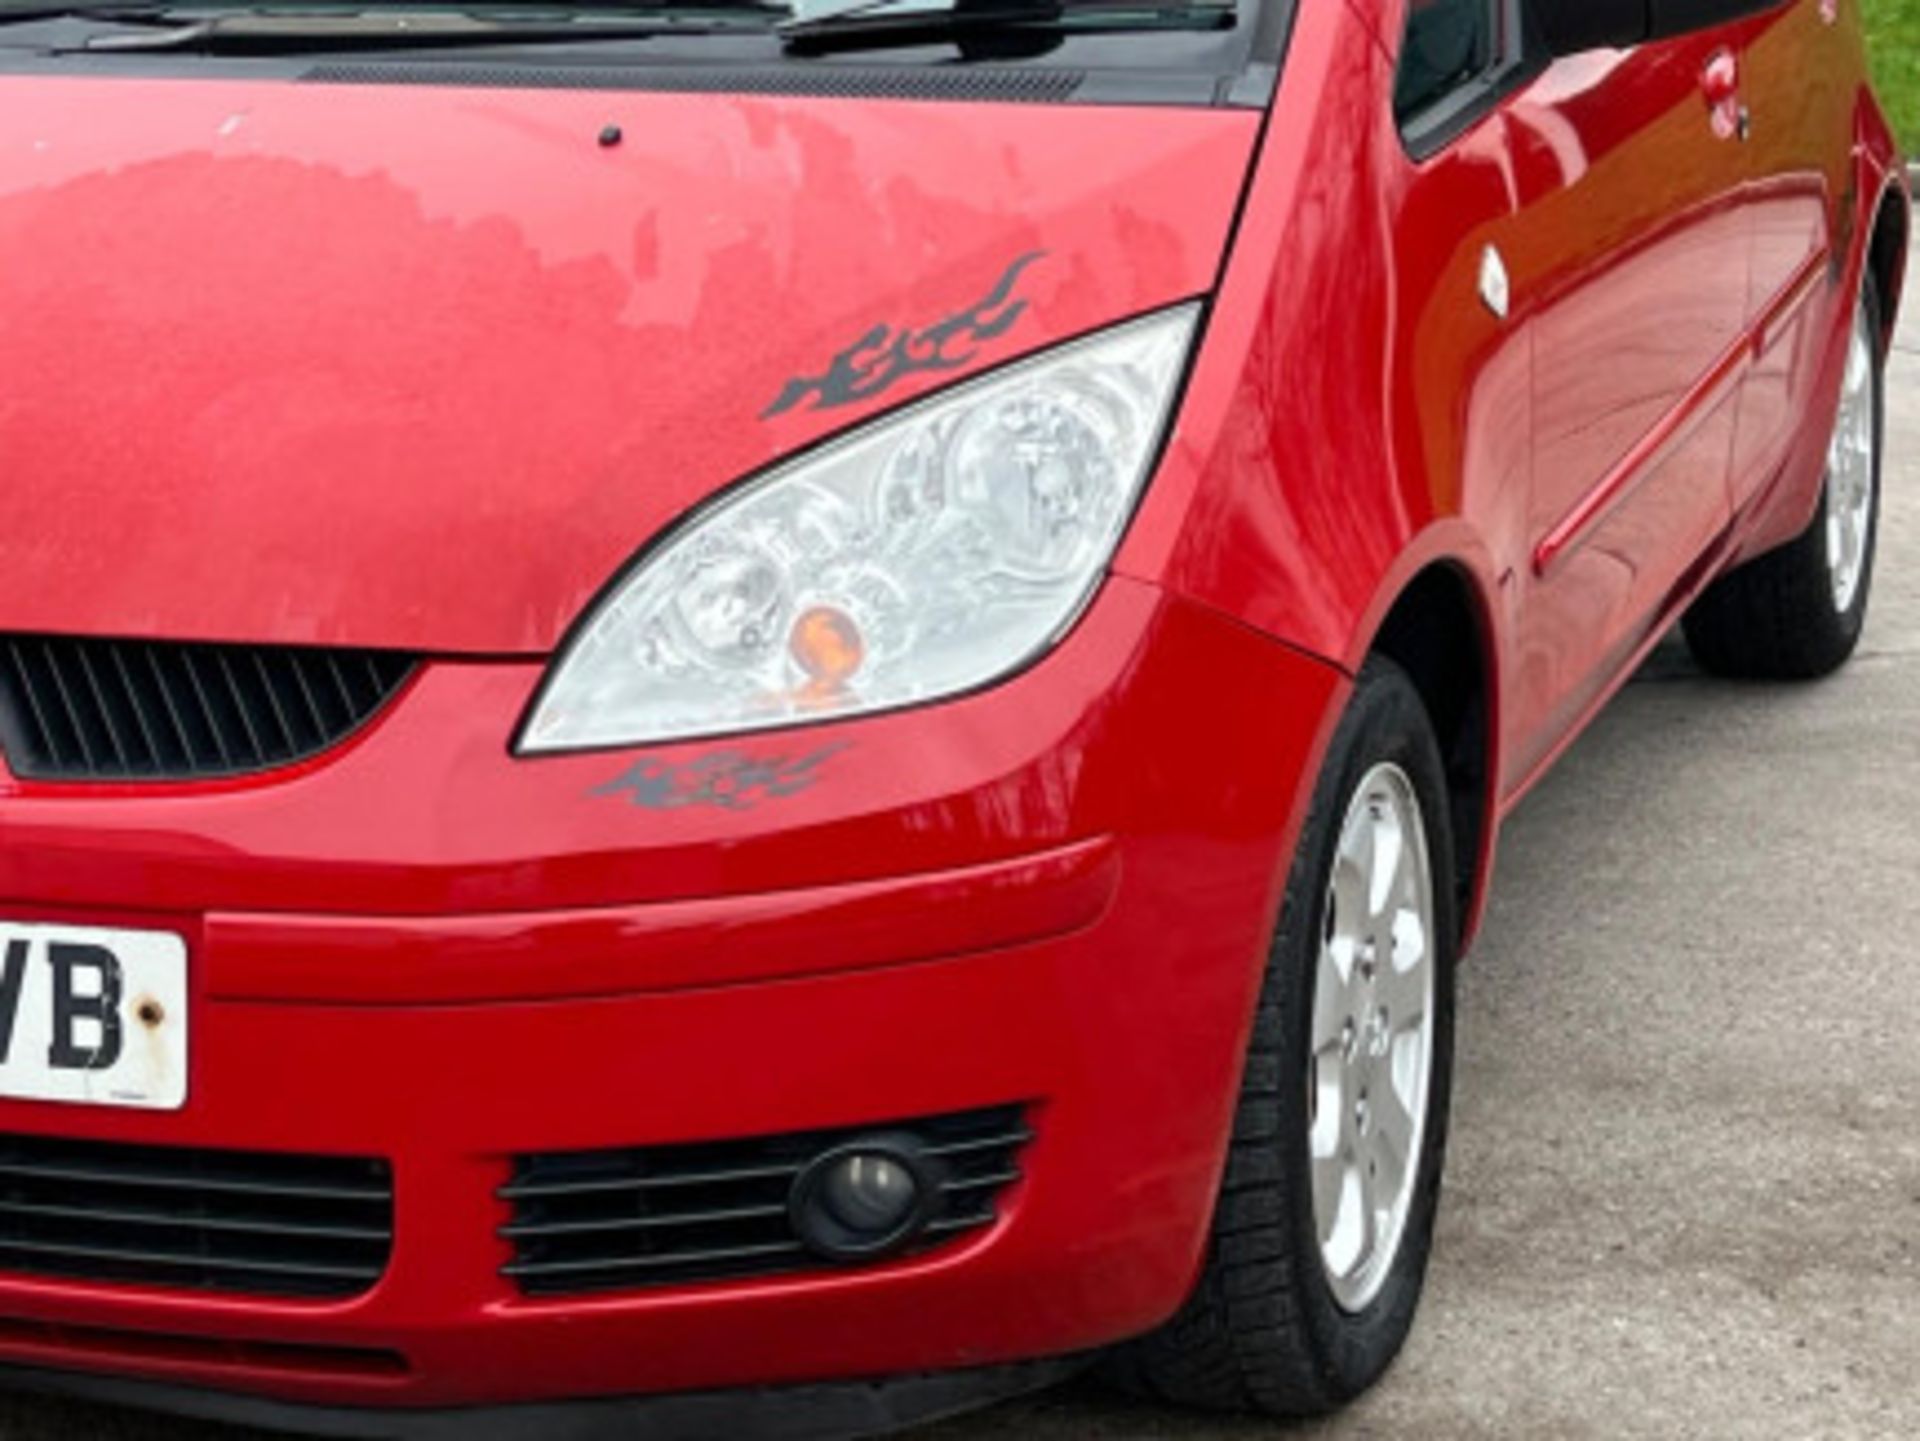 2007 MITSUBISHI COLT 1.5 DI-D DIESEL AUTOMATIC >>--NO VAT ON HAMMER--<< - Image 73 of 191